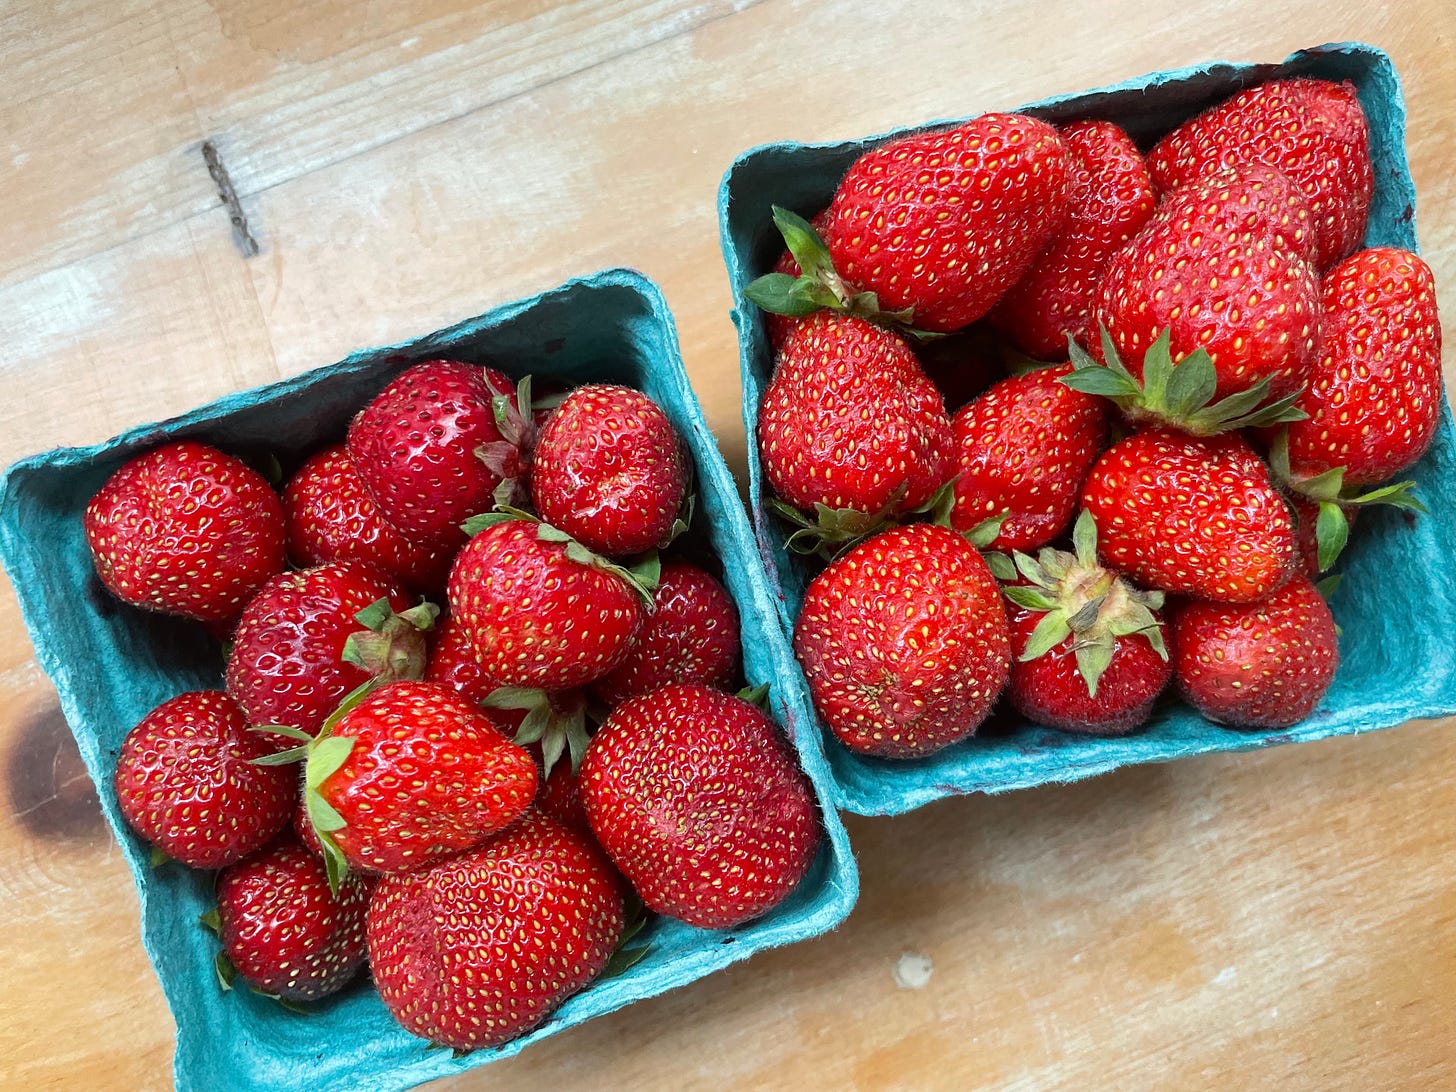 Two cartons of strawberries